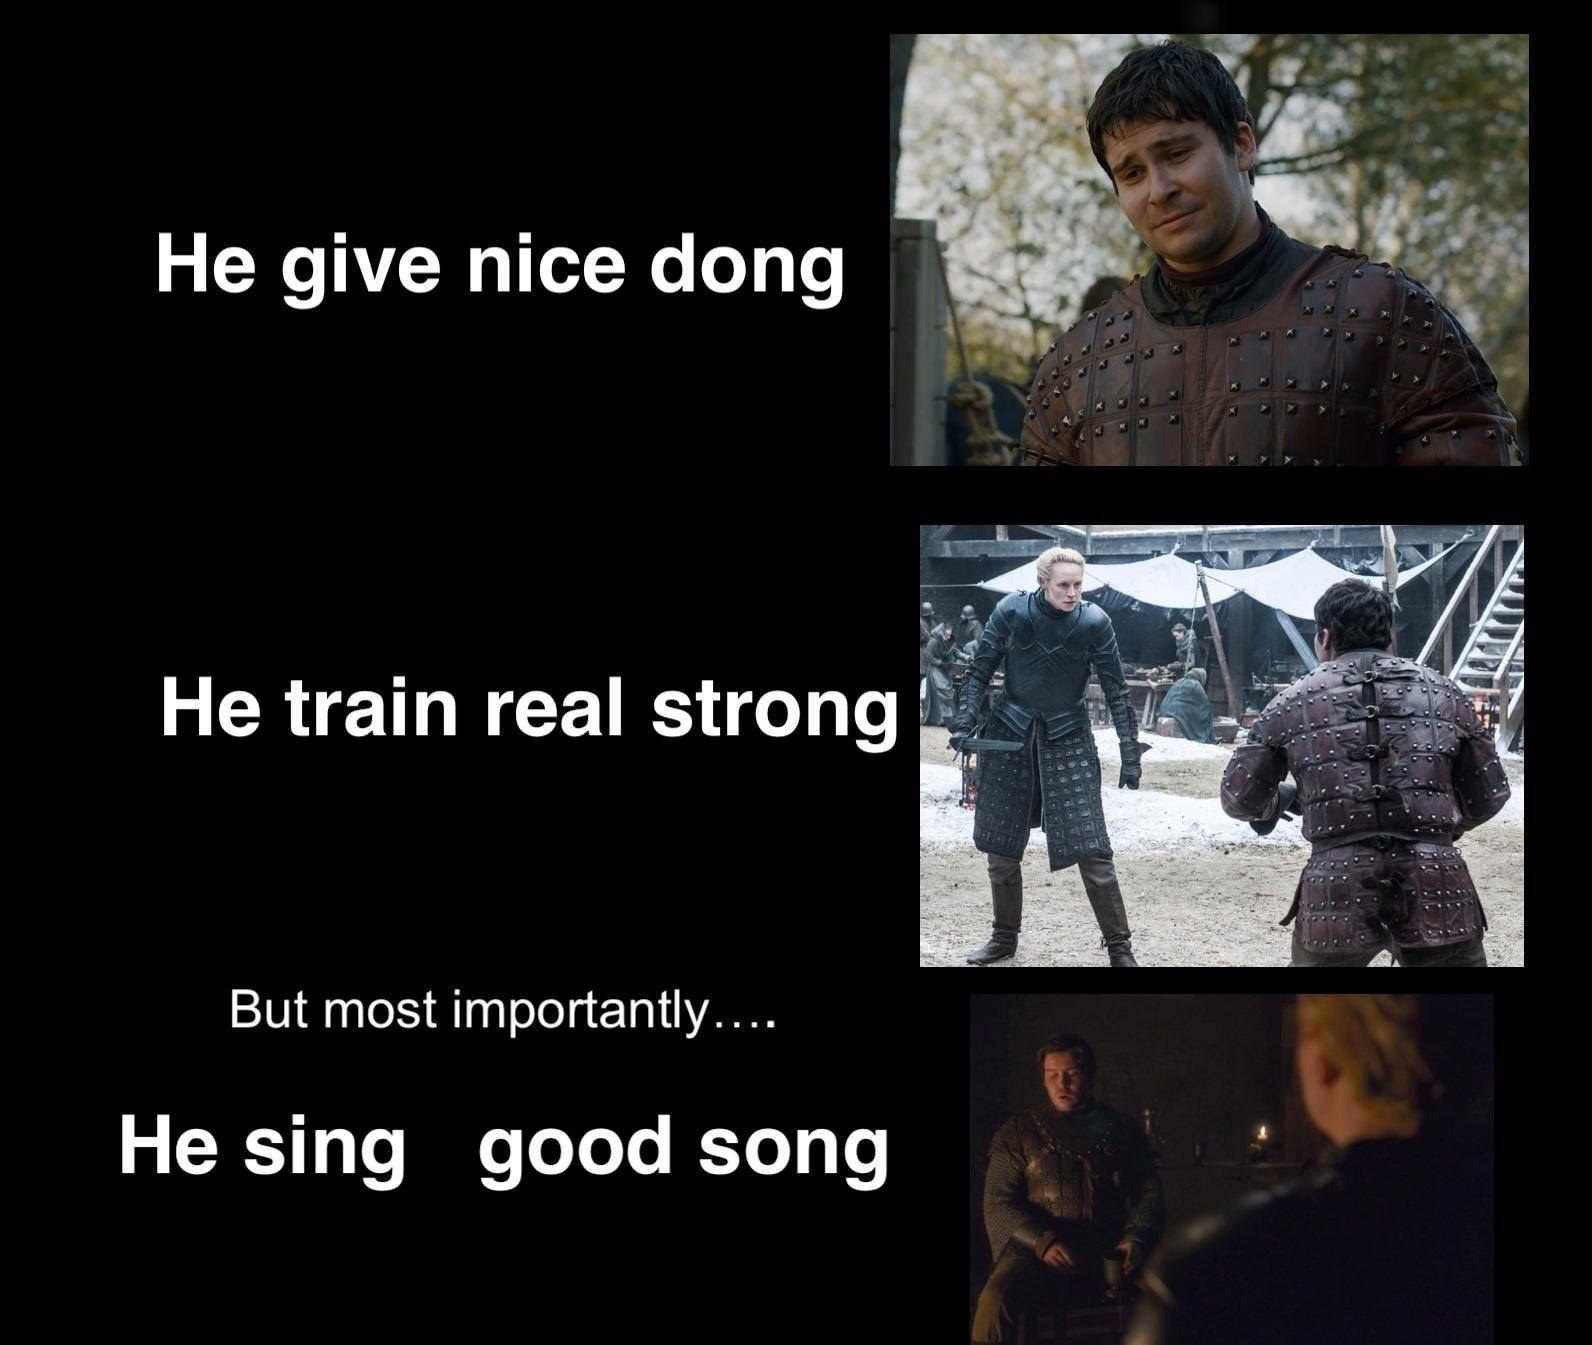 Game Of Thrones” Memes, part 2